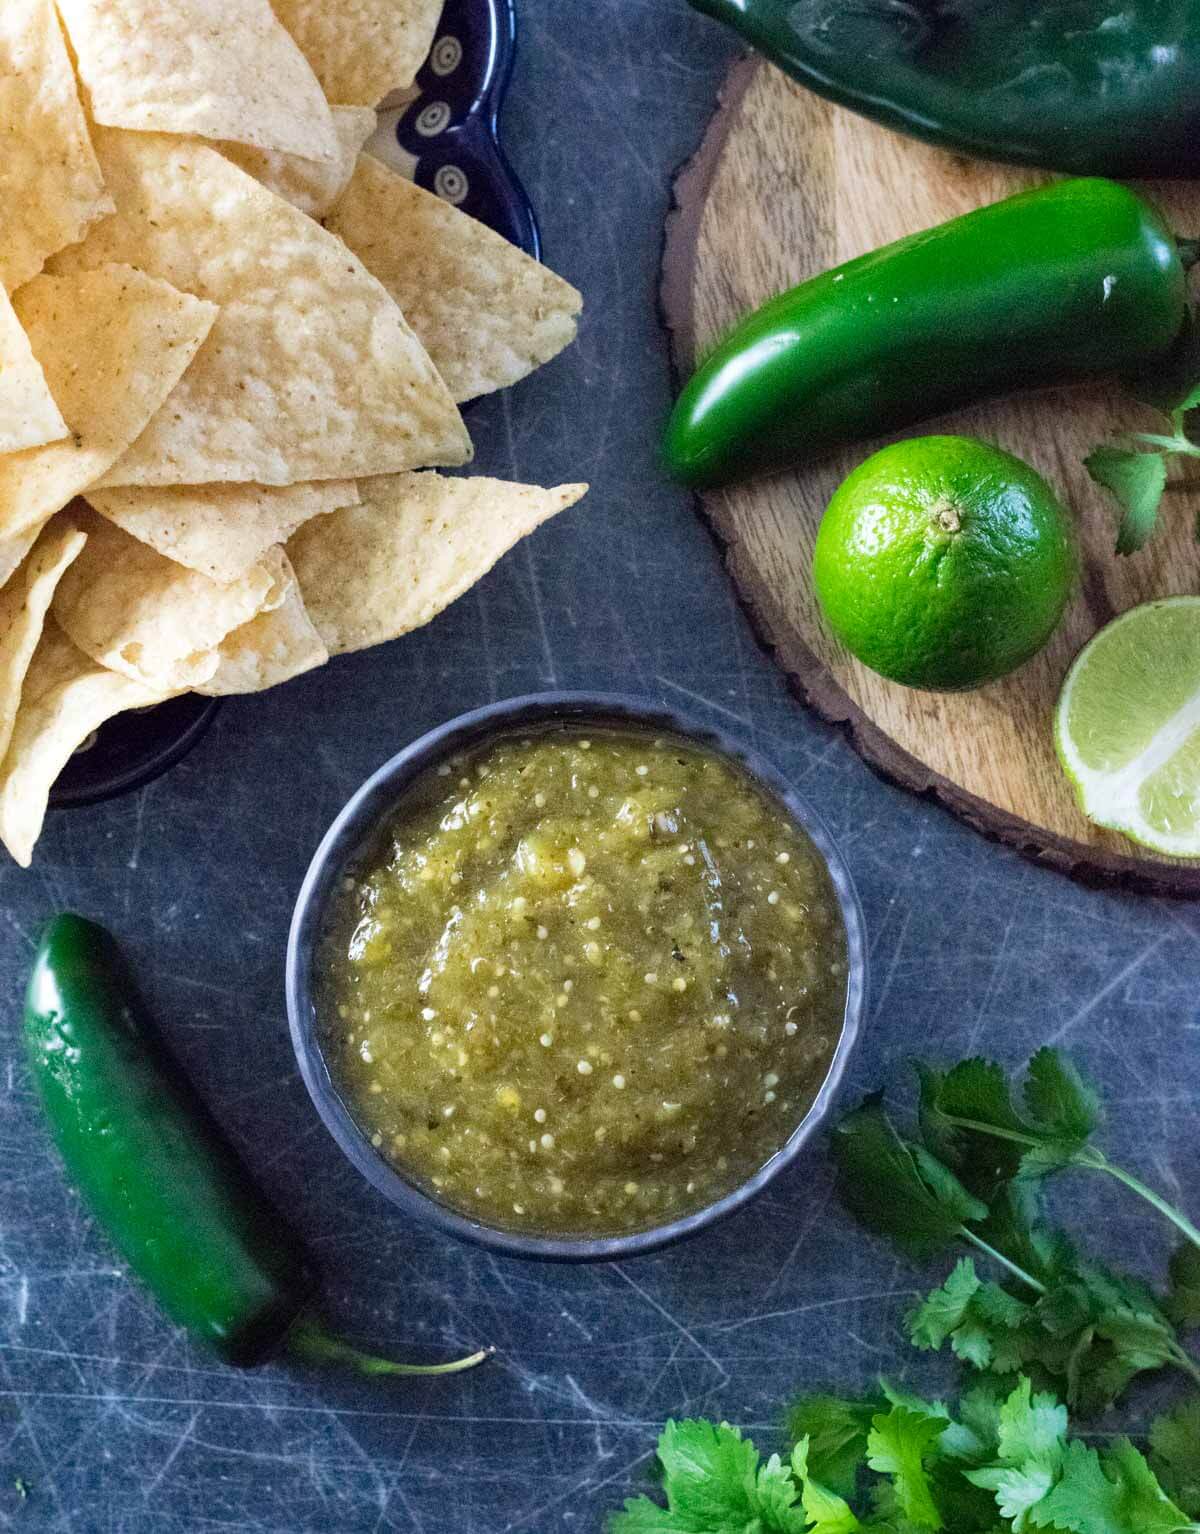 How to make tomatillo salsa - salsa viewed from above with chips and peppers